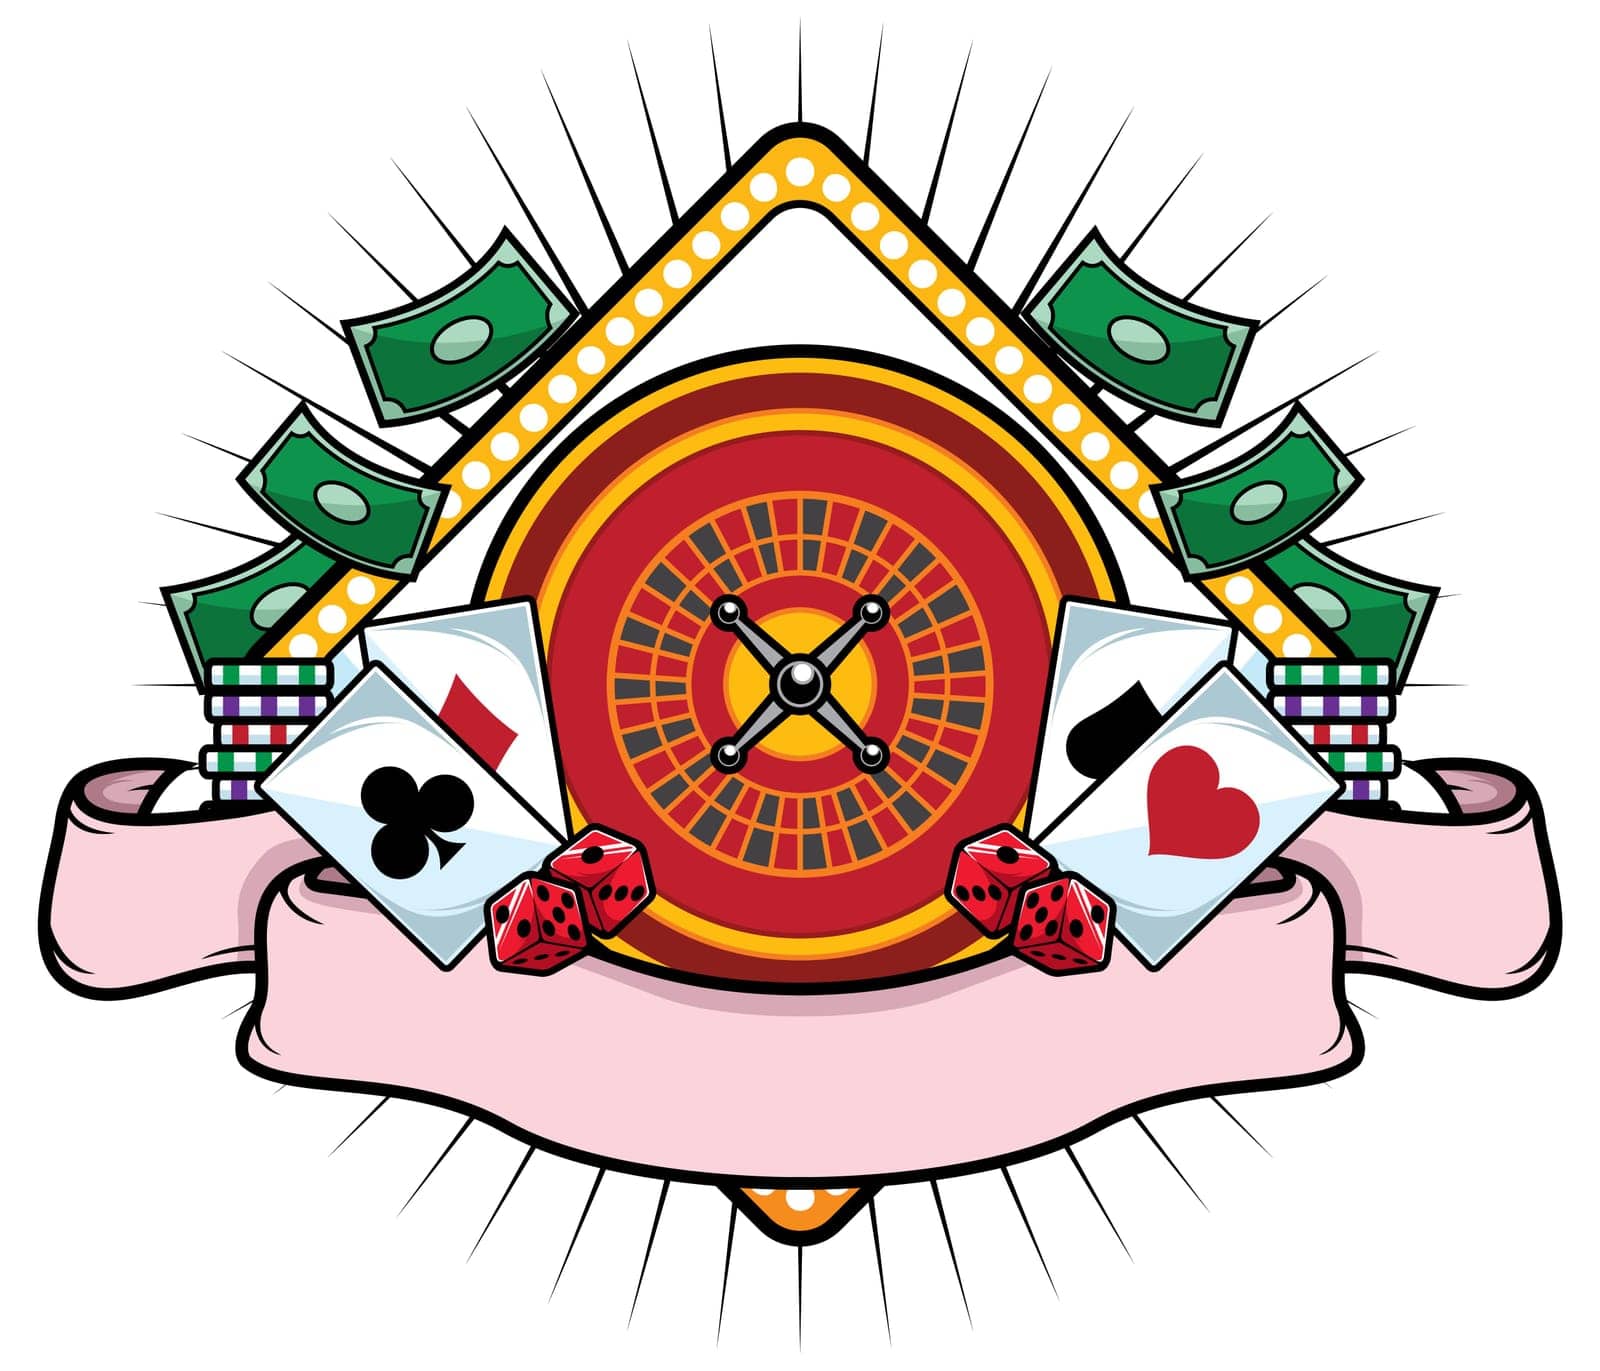 Casino mascot or logo over white background and copy space.